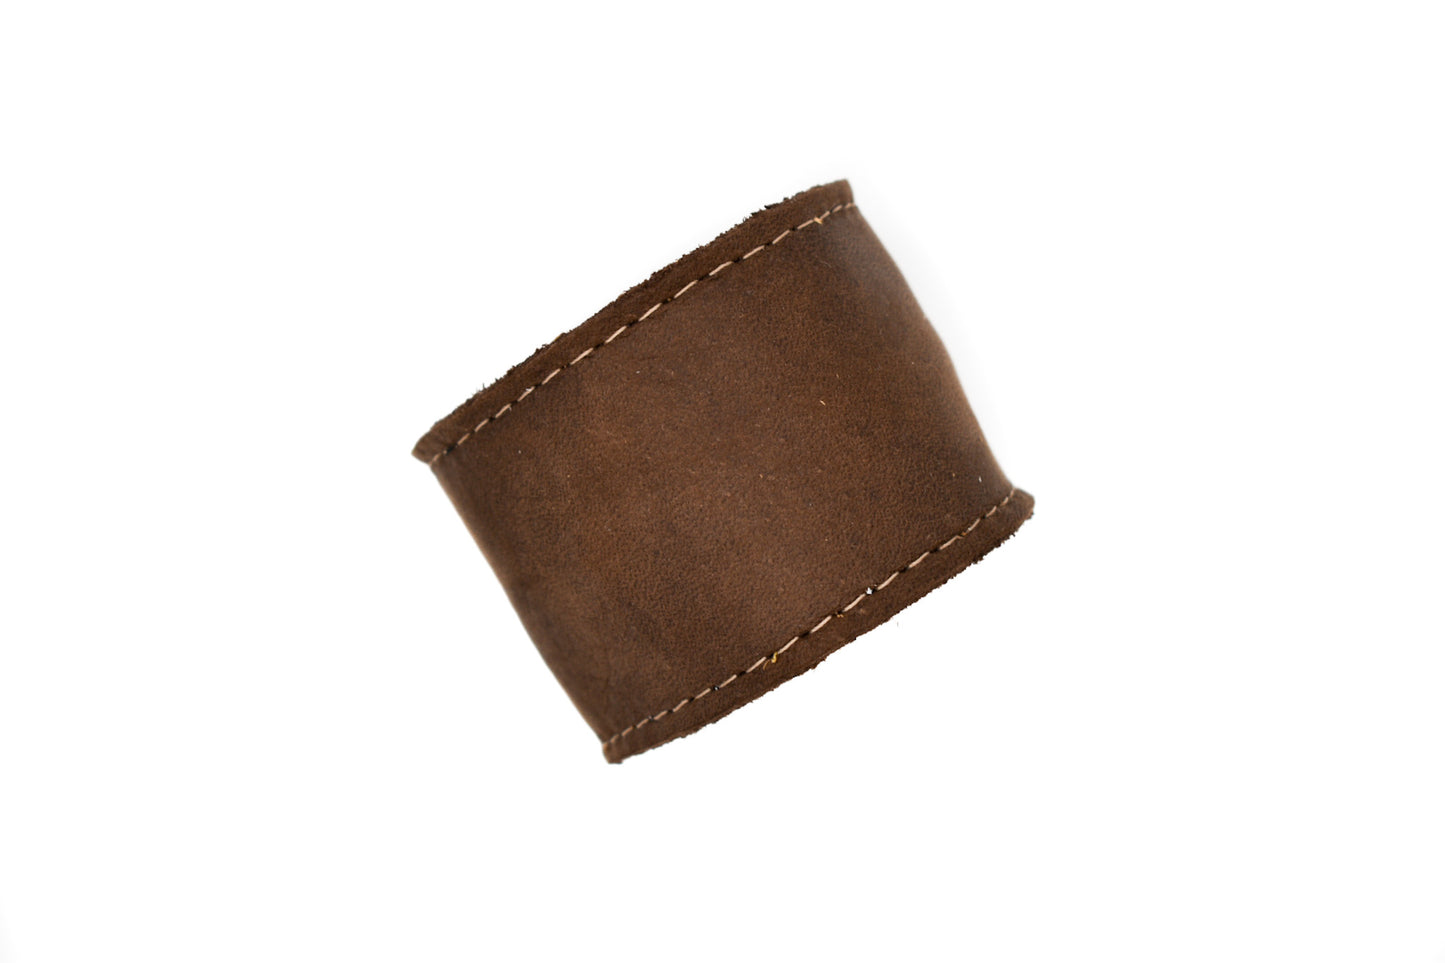 The Tipster Cuff